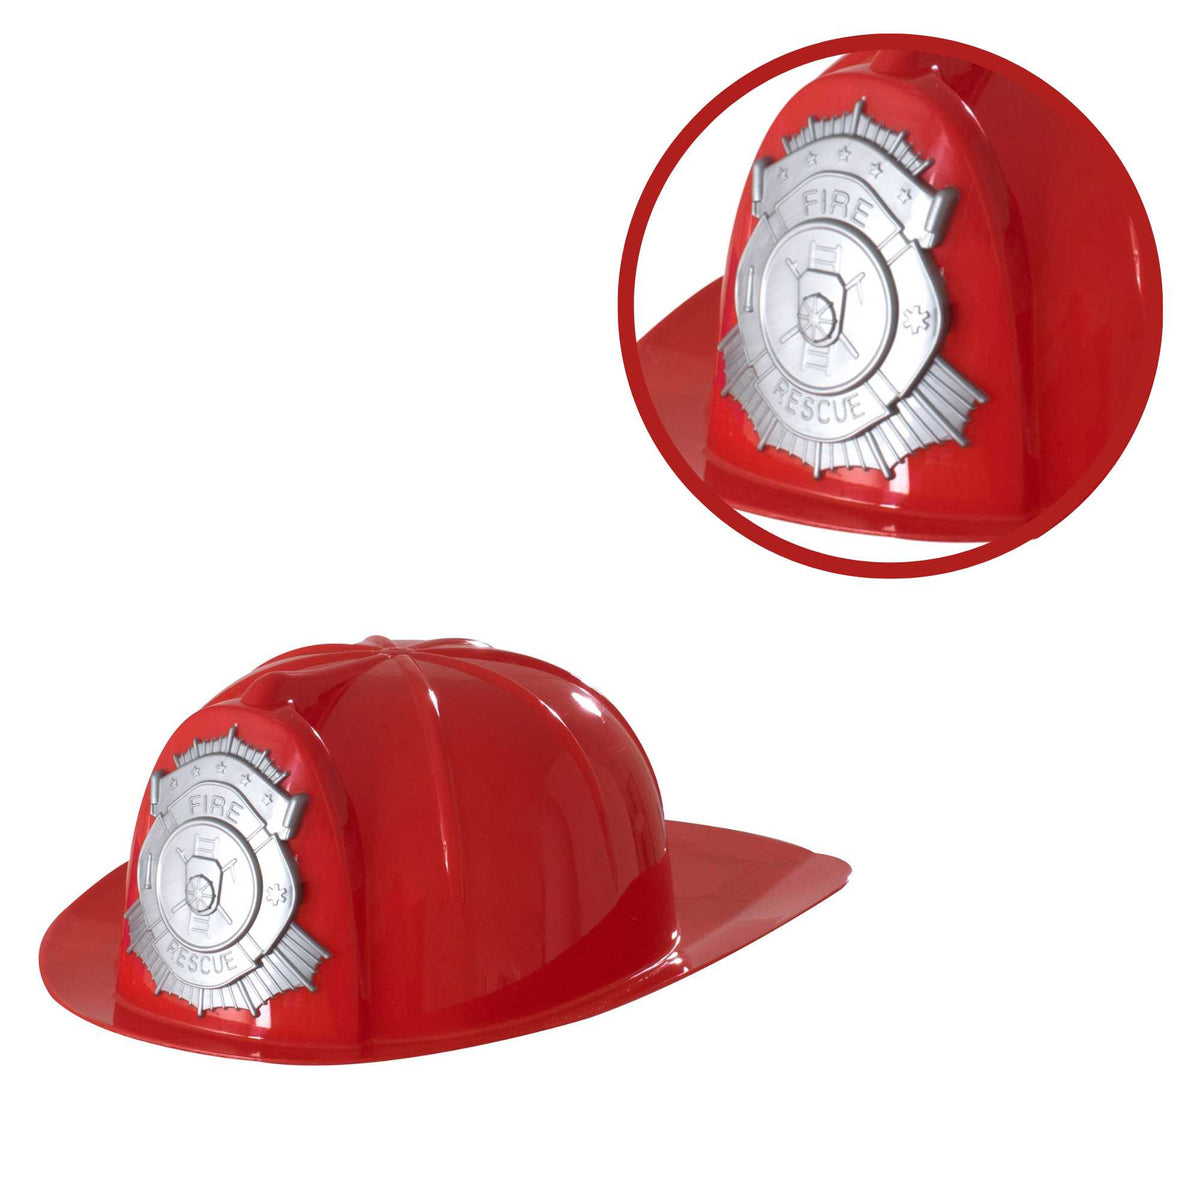 Childrens Roleplay Fancy Dress Fireman Hats - Pack of 2